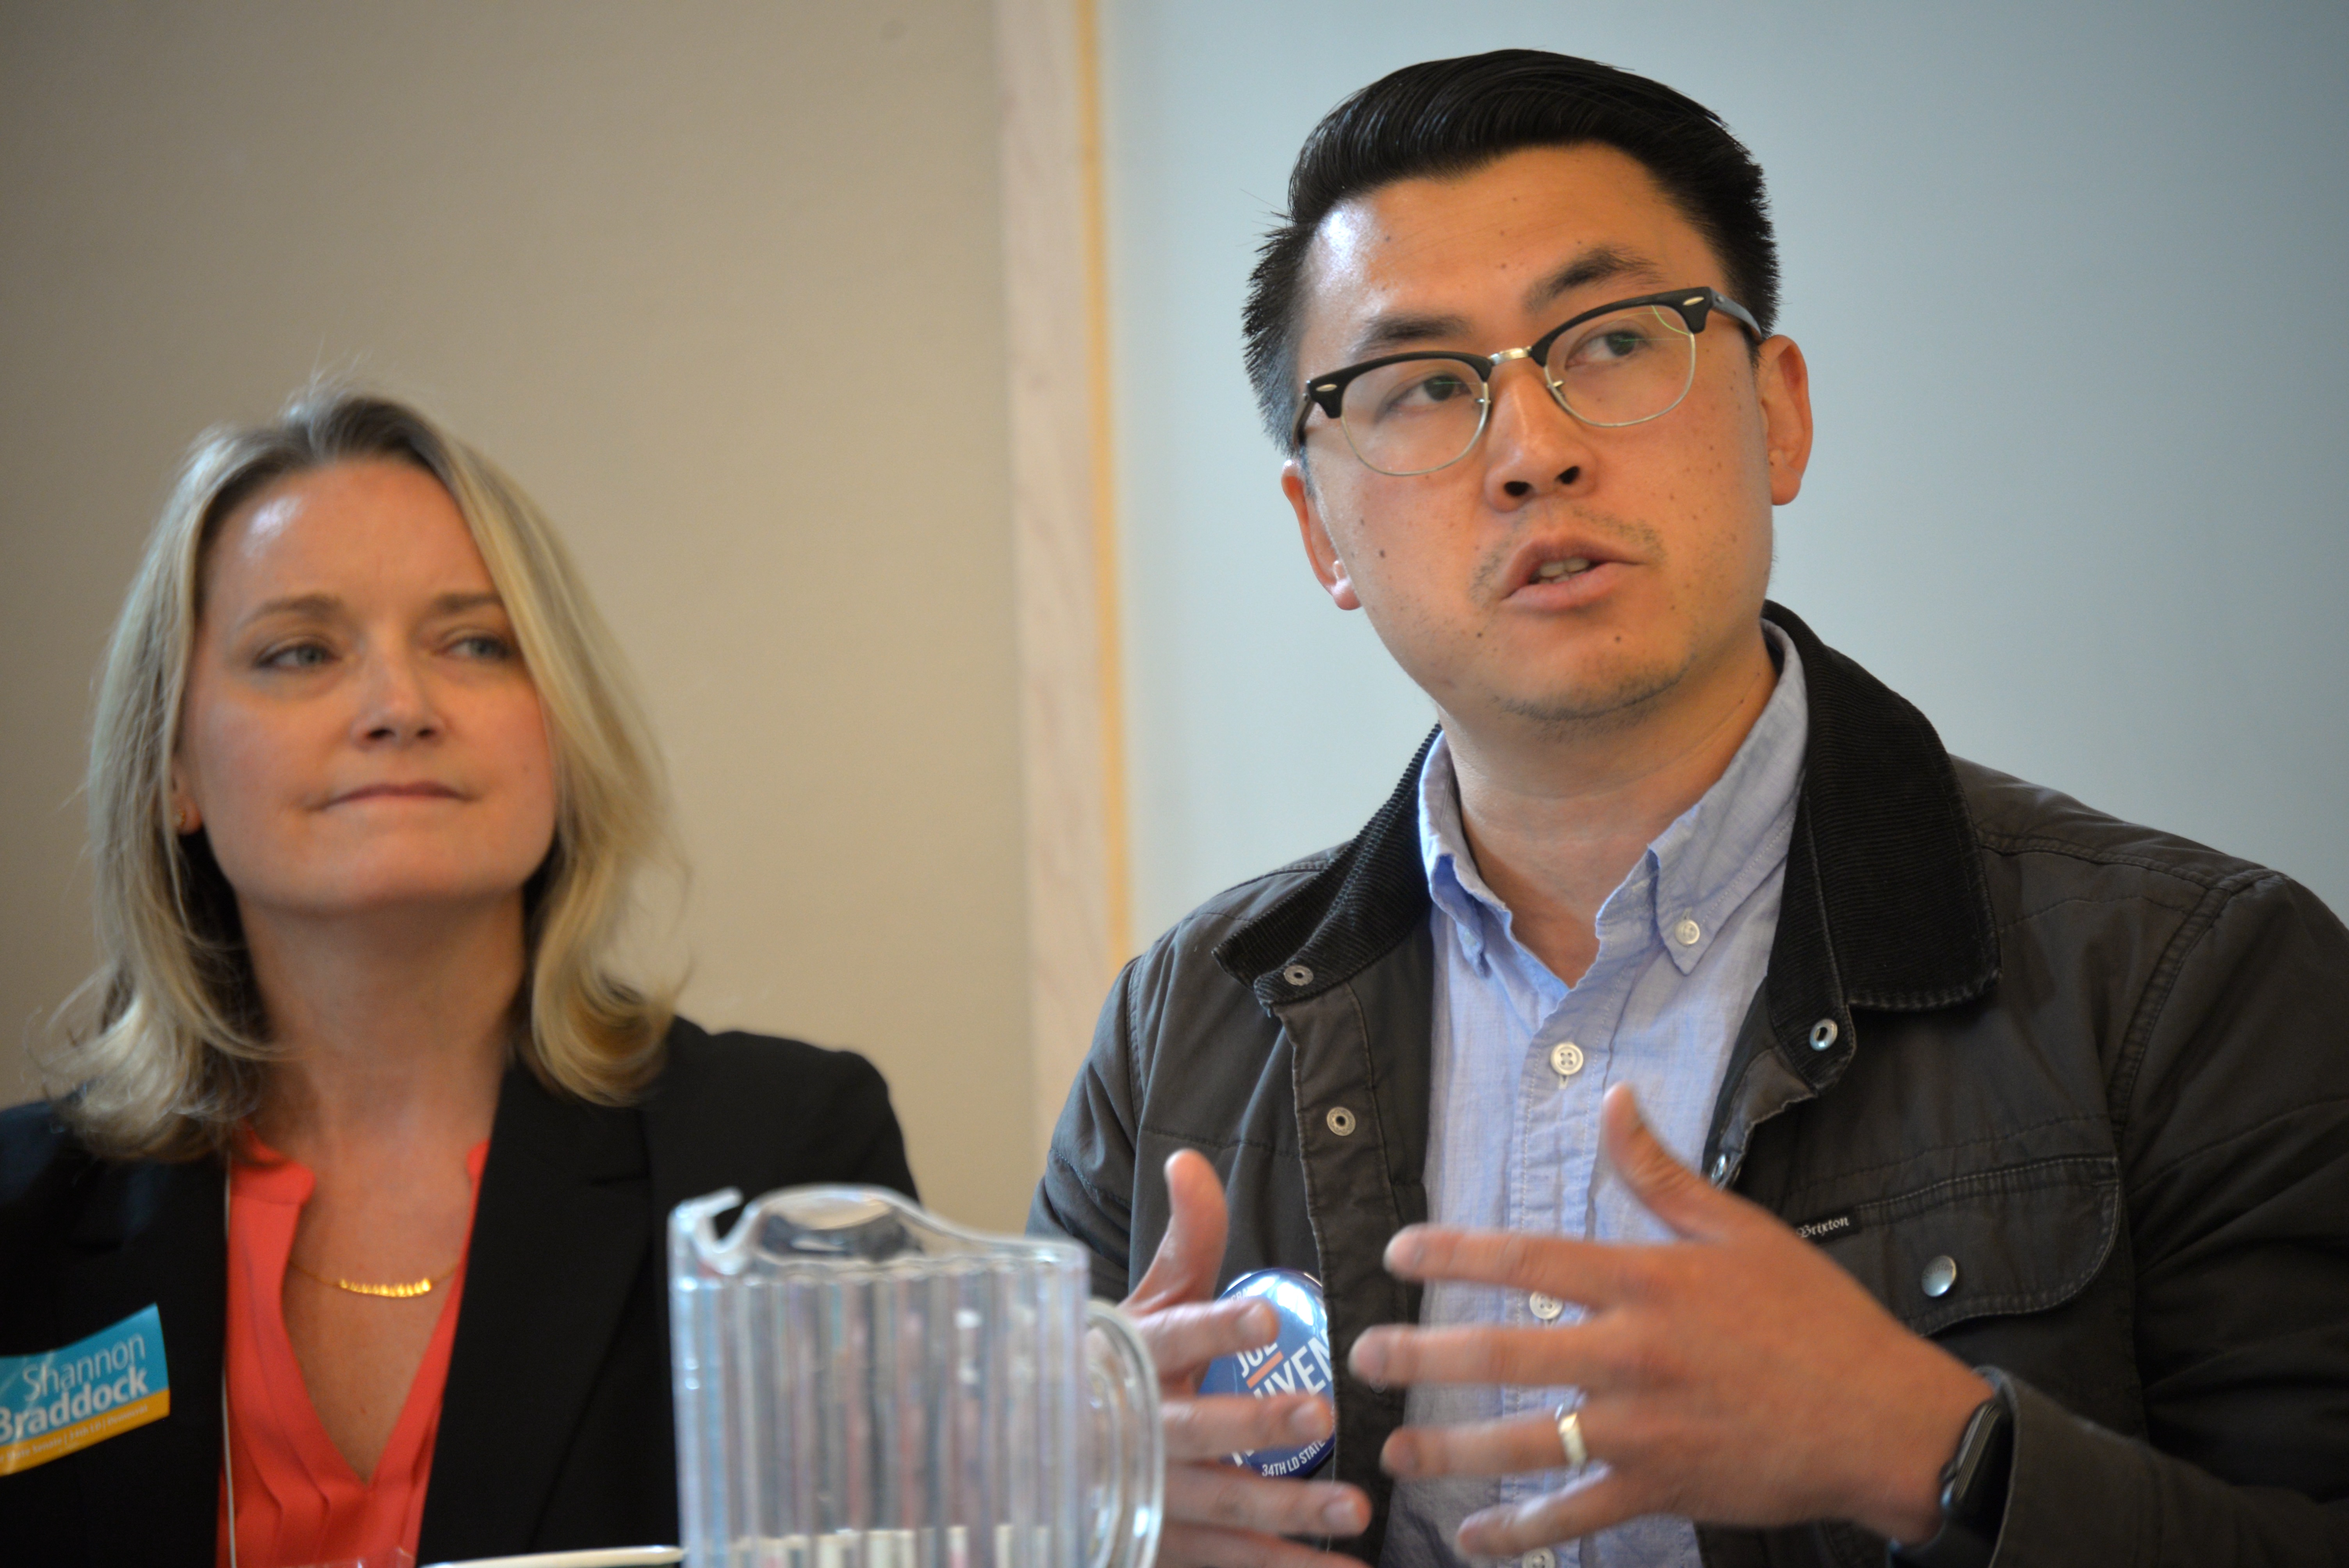 Candidate Joe Nguyen discussed the need for progressive taxes instead of regressive ones currently in place. 